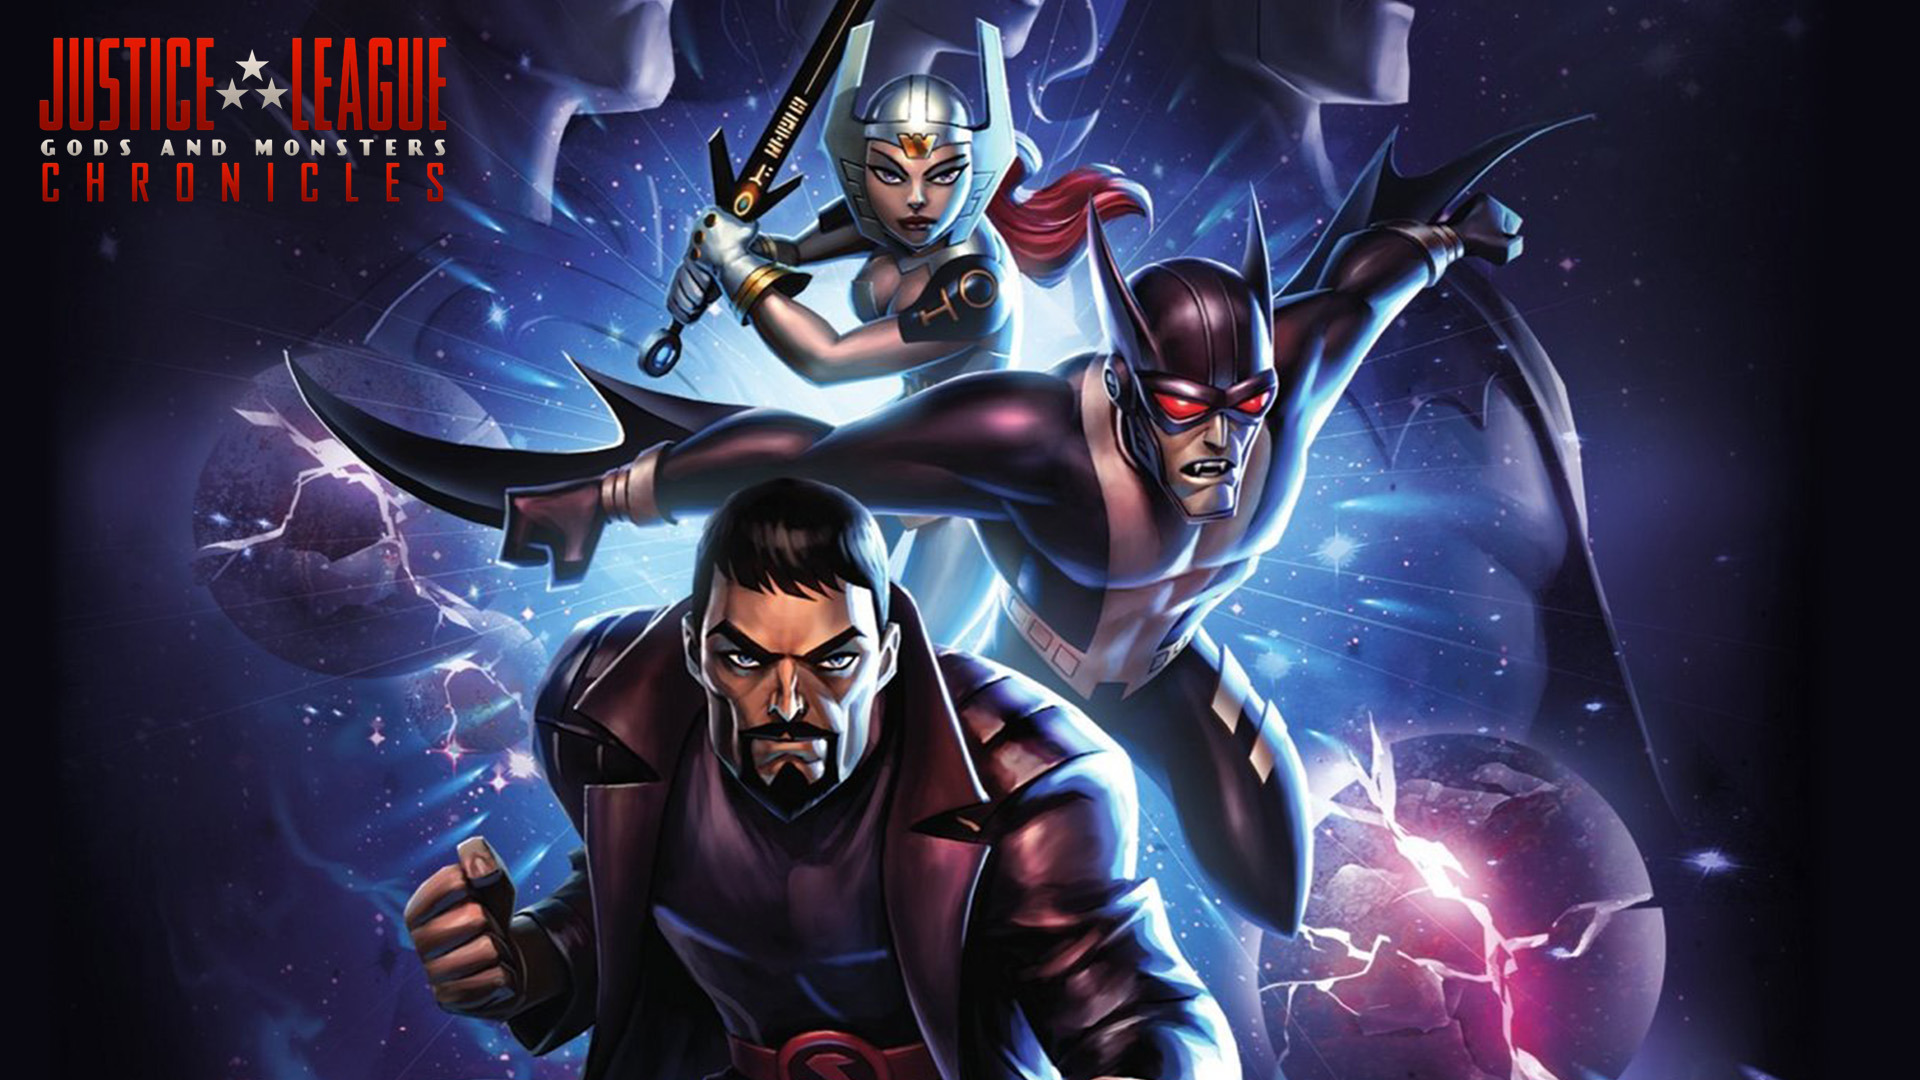 Show Justice League: Gods and Monsters Chronicles